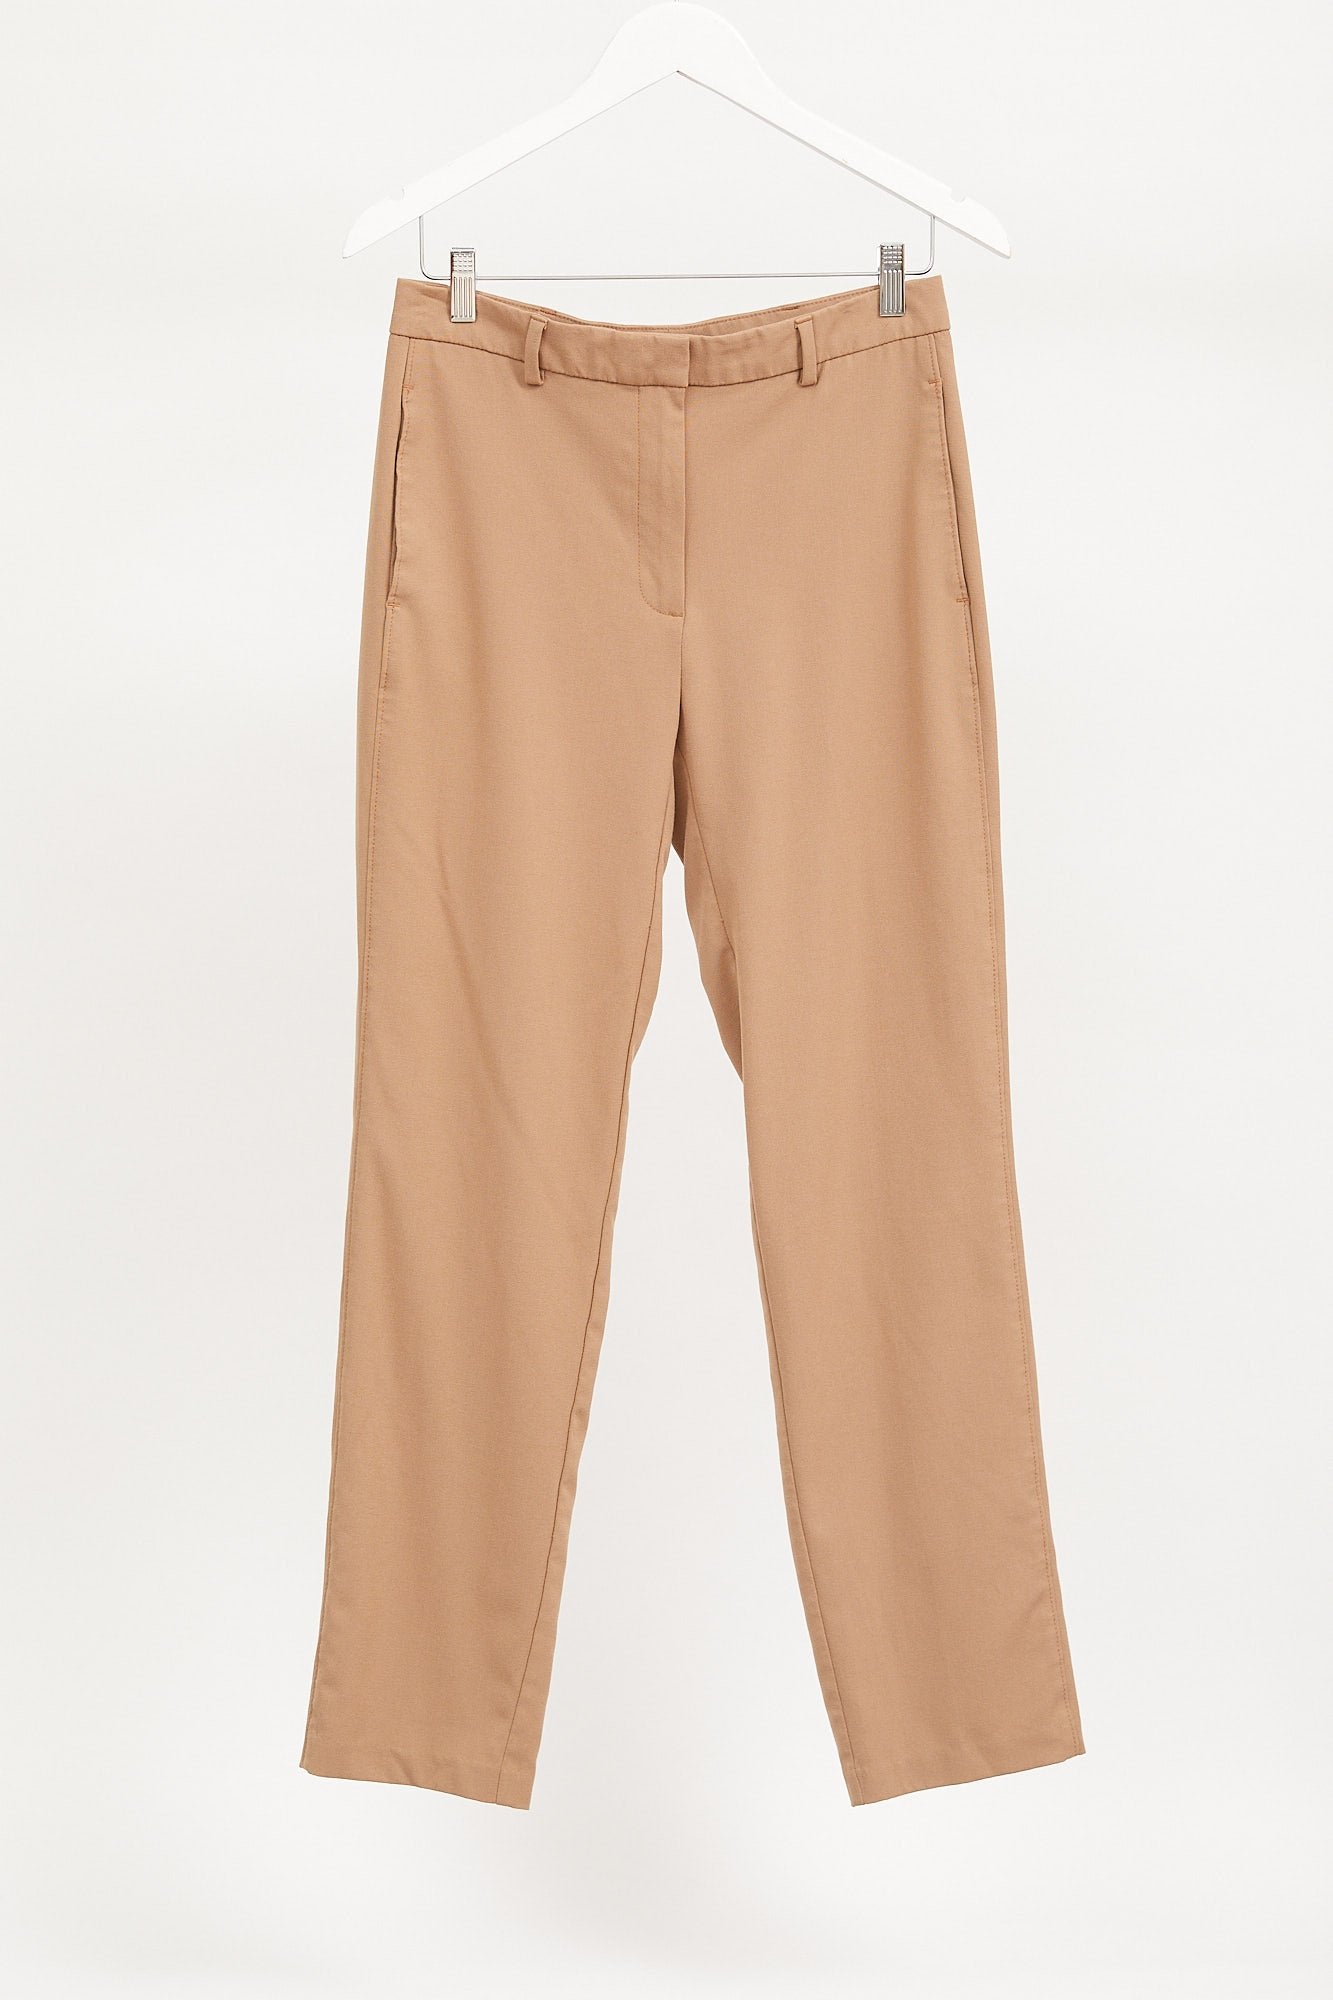 Womens Brown Trouser: Size Small